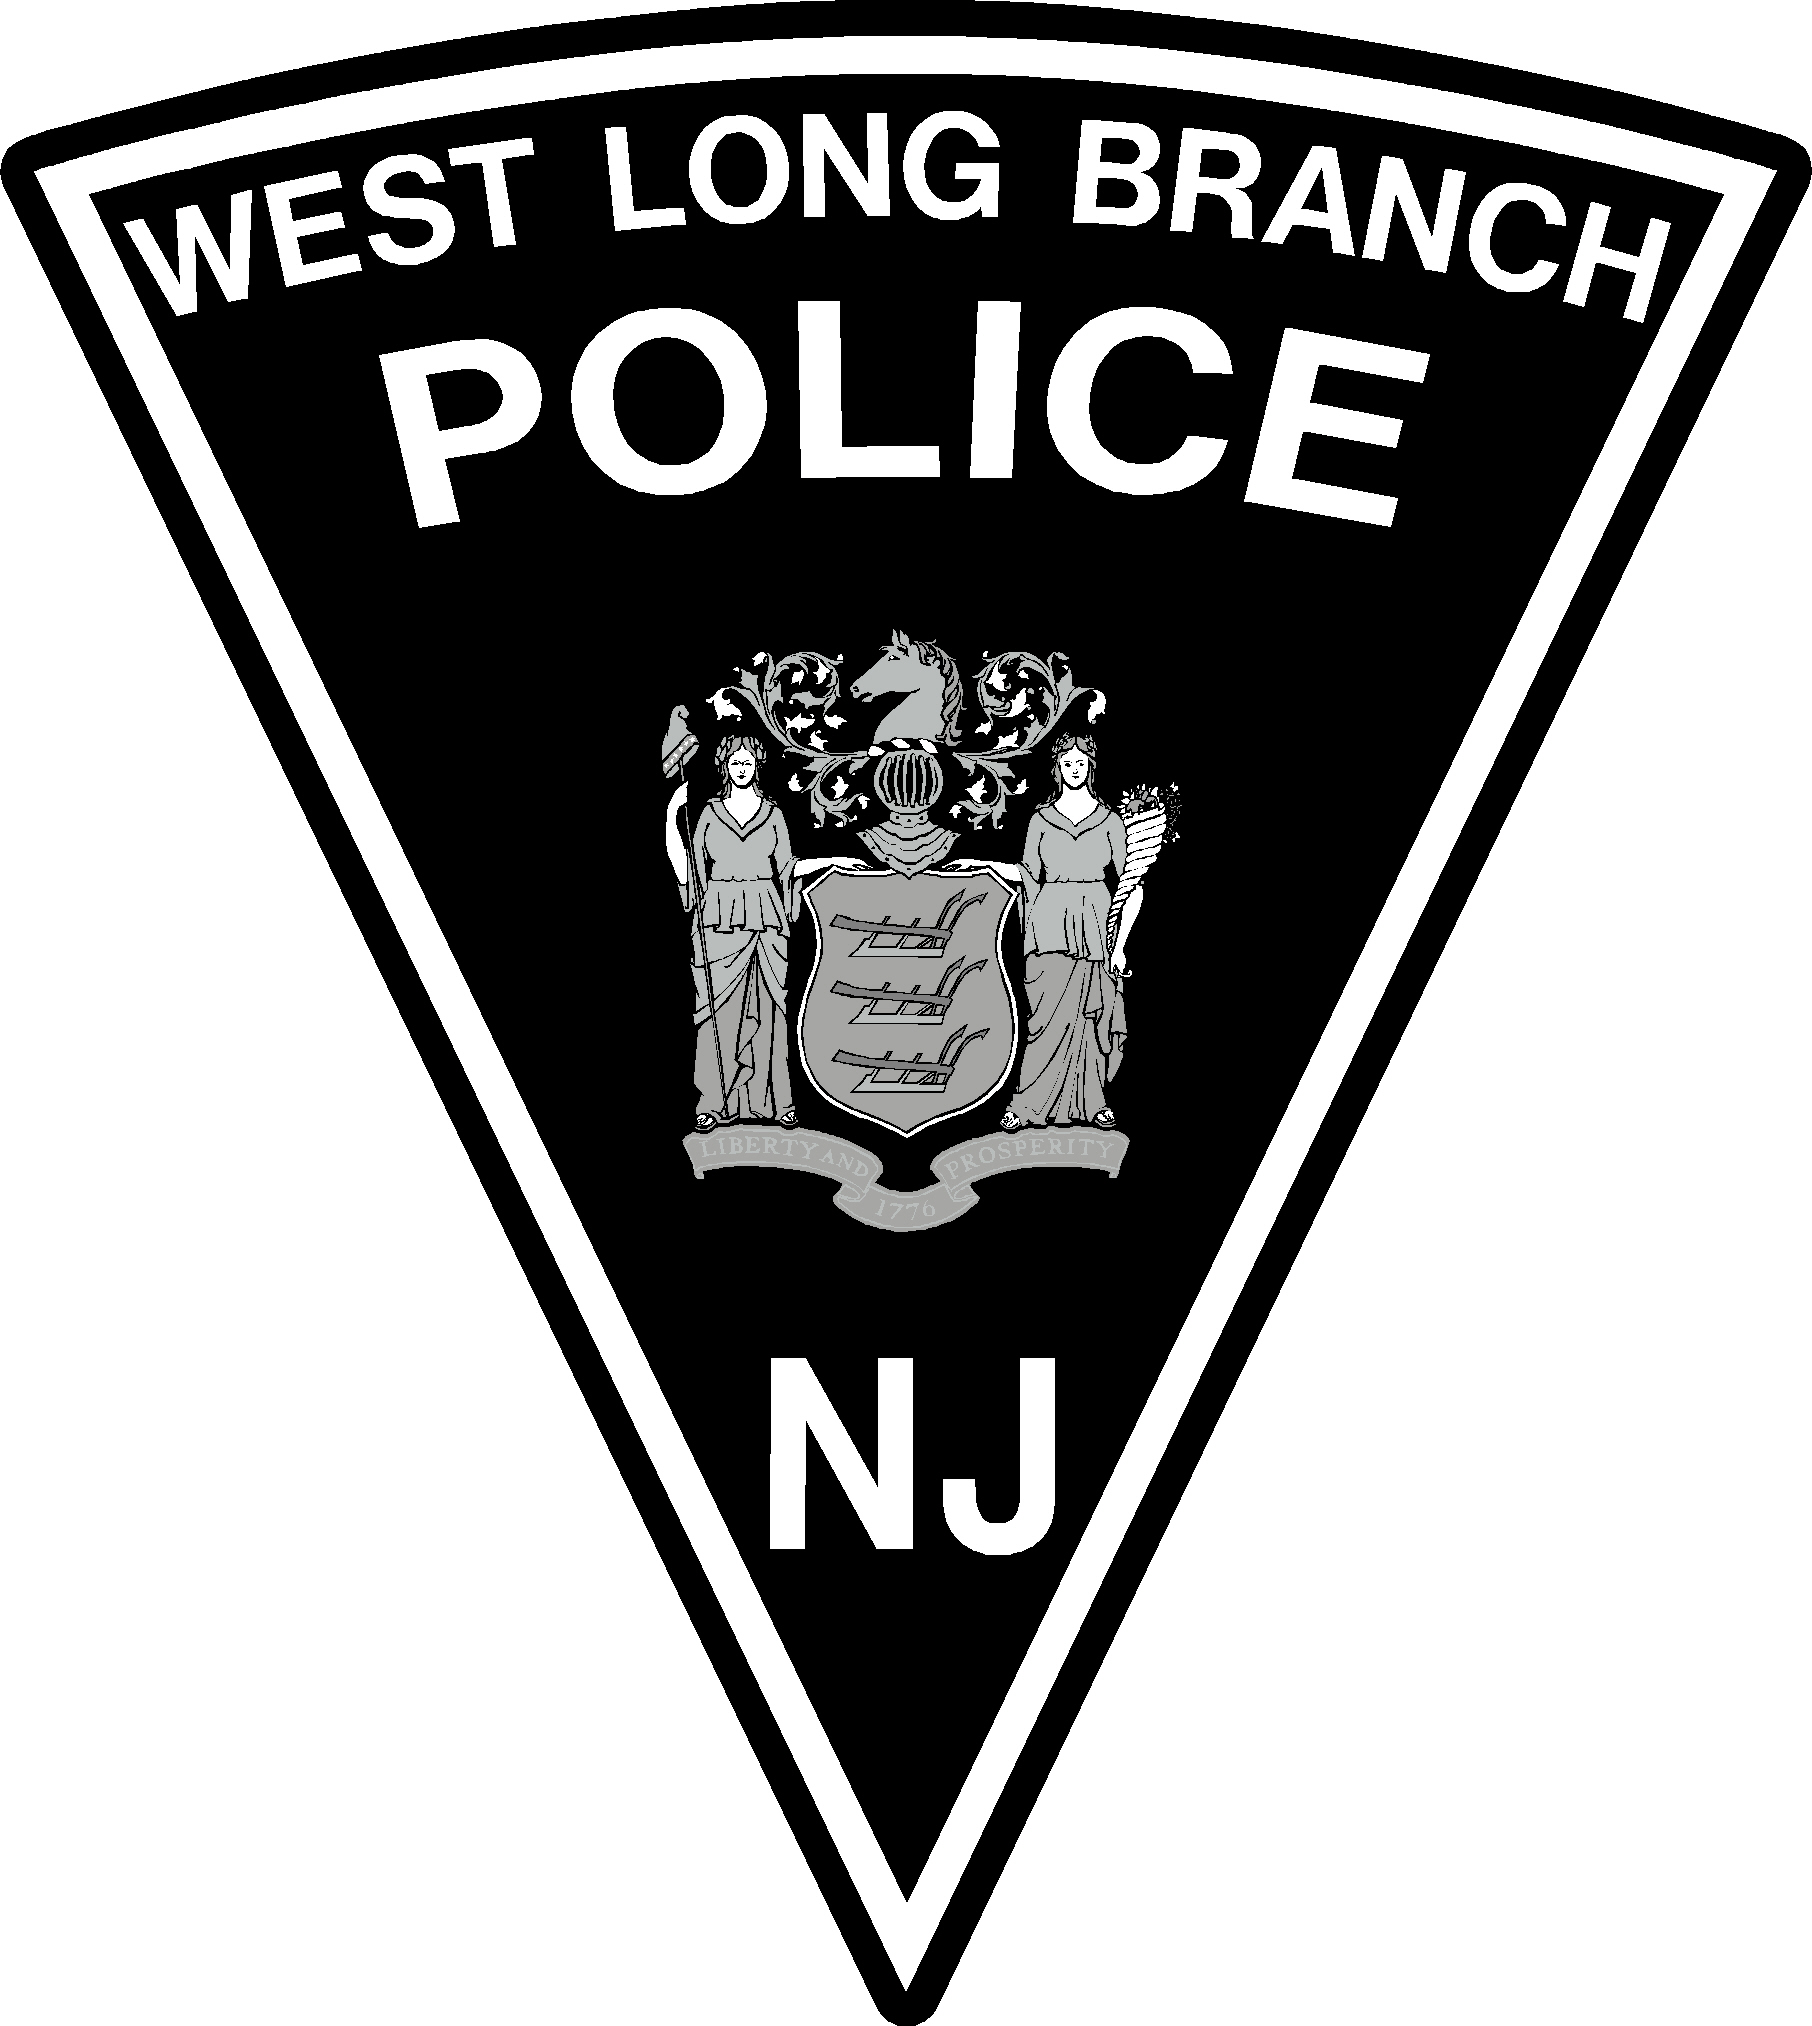 West Long Branch Police Department, NJ 